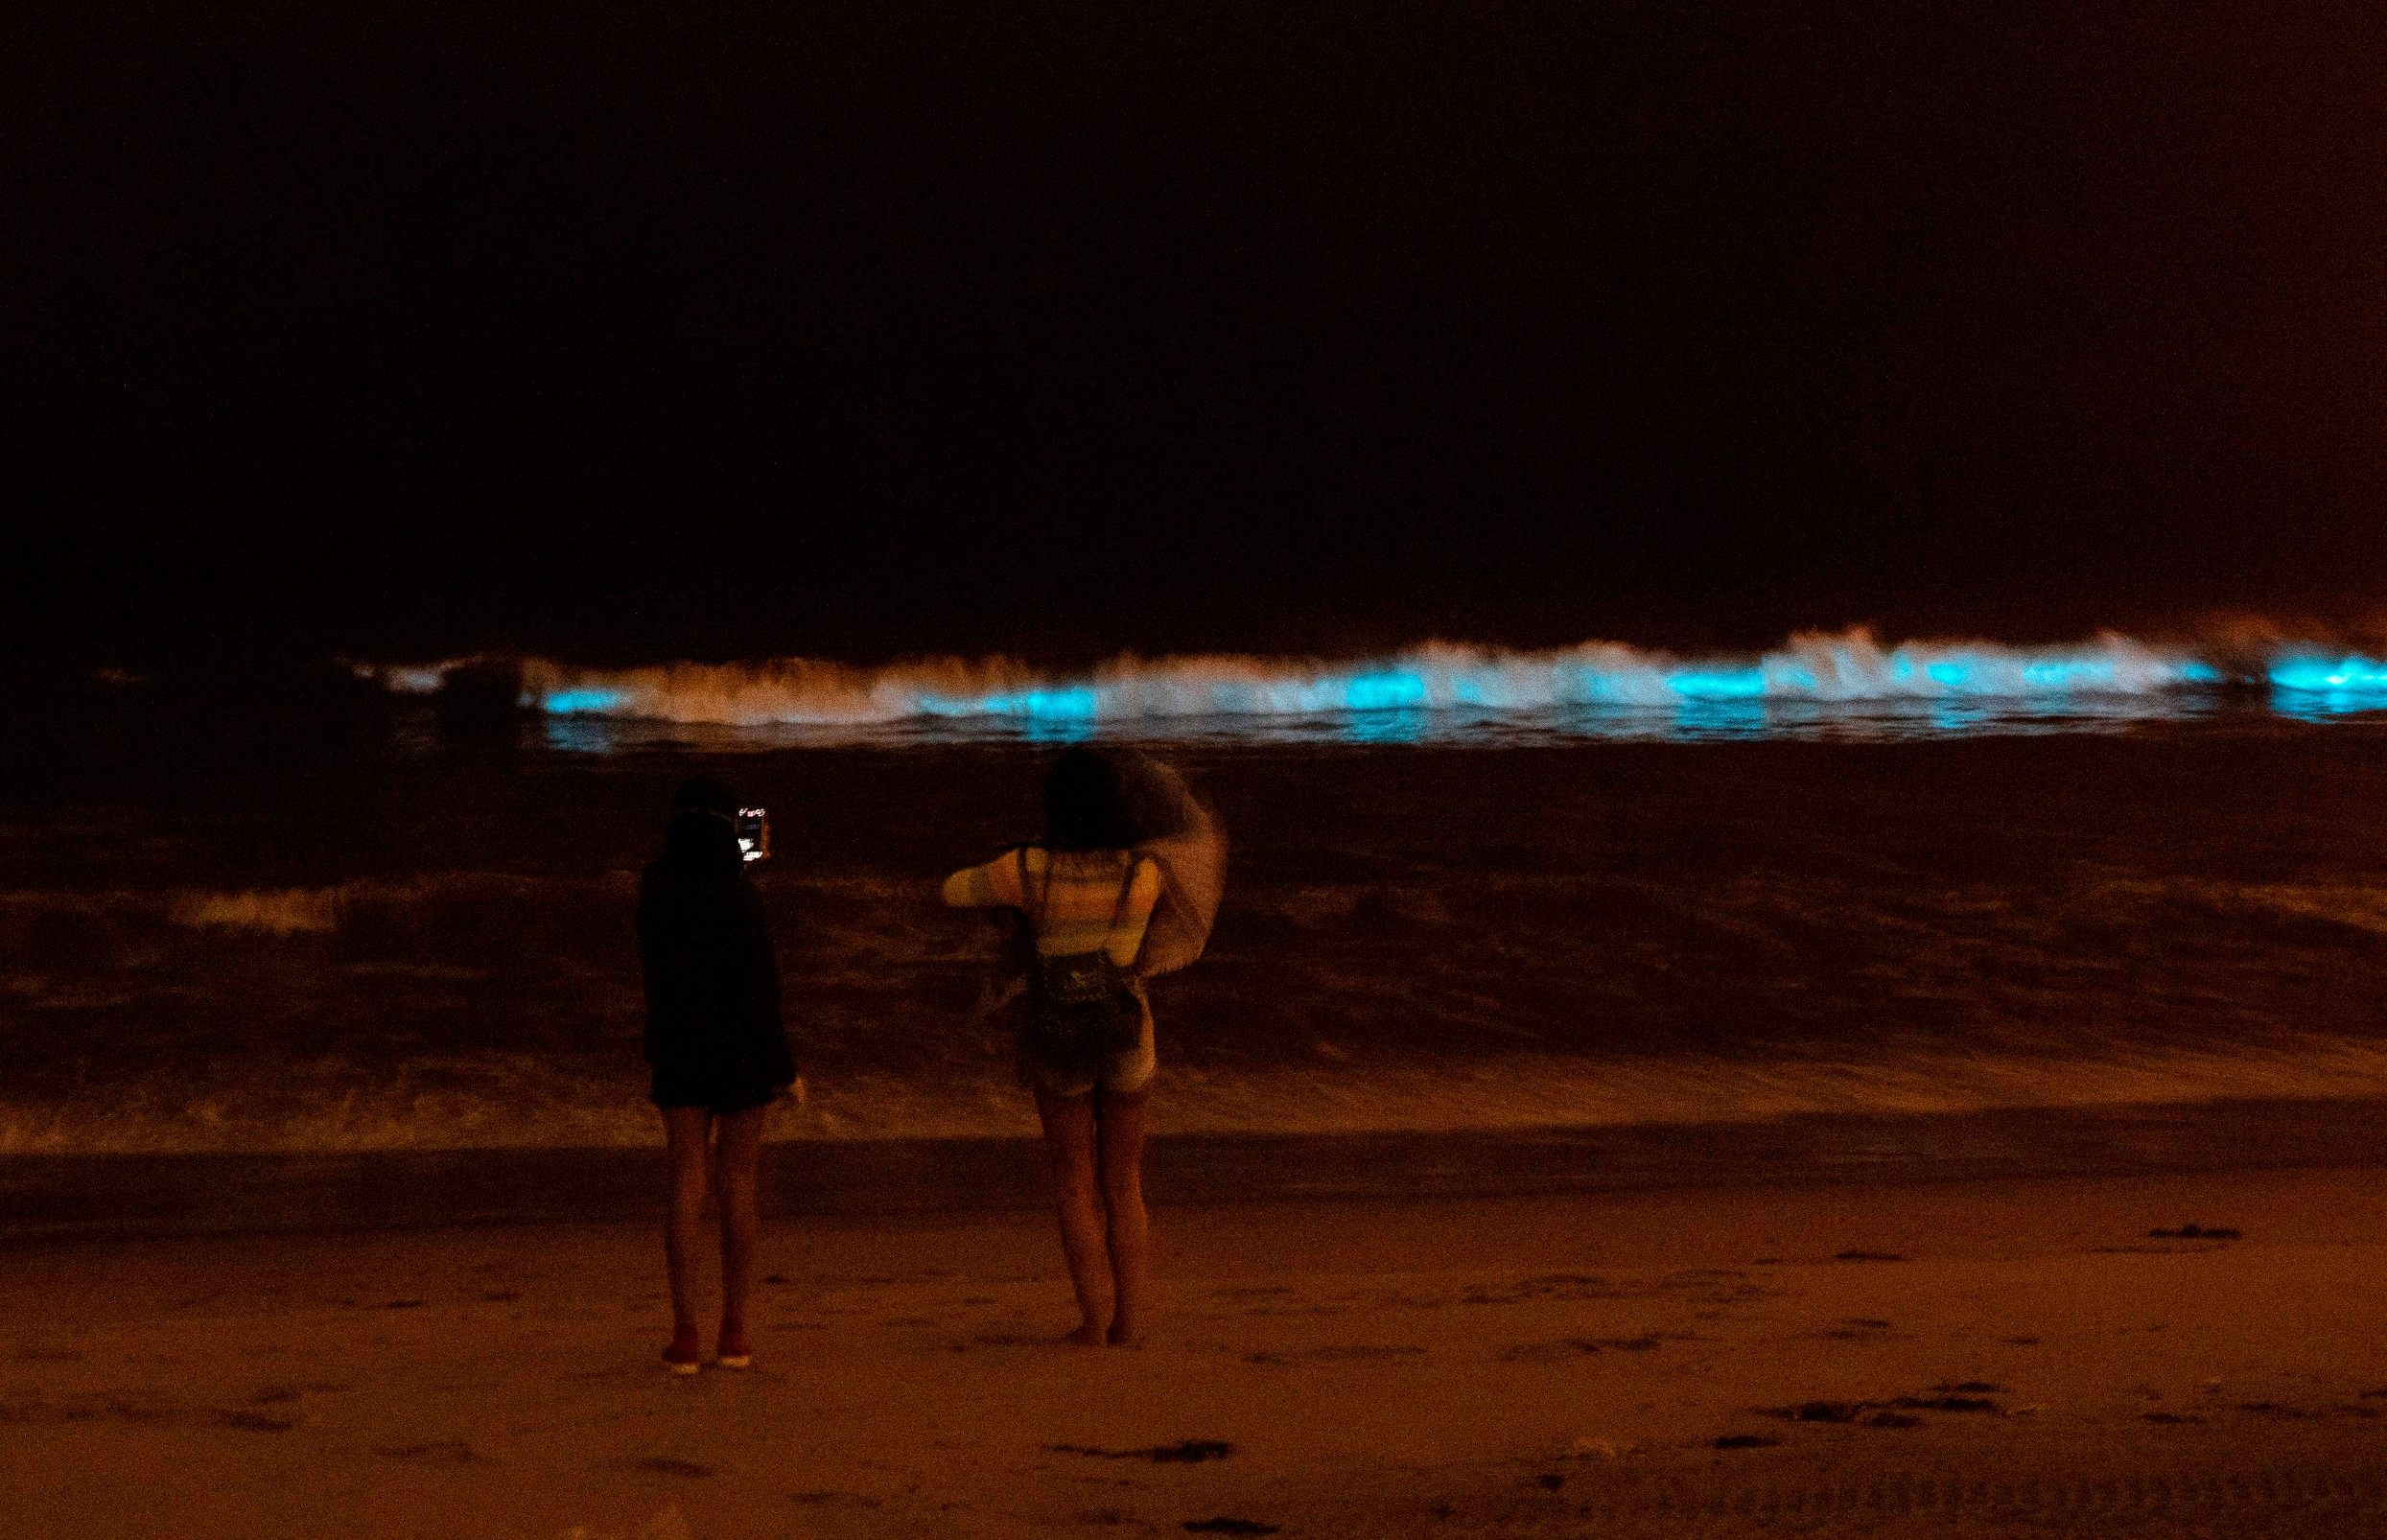 People watch the bioluminescent waves crash on the sand, shining with a blue glow on April 28, 2020, in Manhattan Beach, California. - Bioluminescence is a phenomenon caused by certain kinds of phytoplankton associated with red tide that by night generate a pulse of blue light as the waves crash. (Photo by VALERIE MACON / AFP)